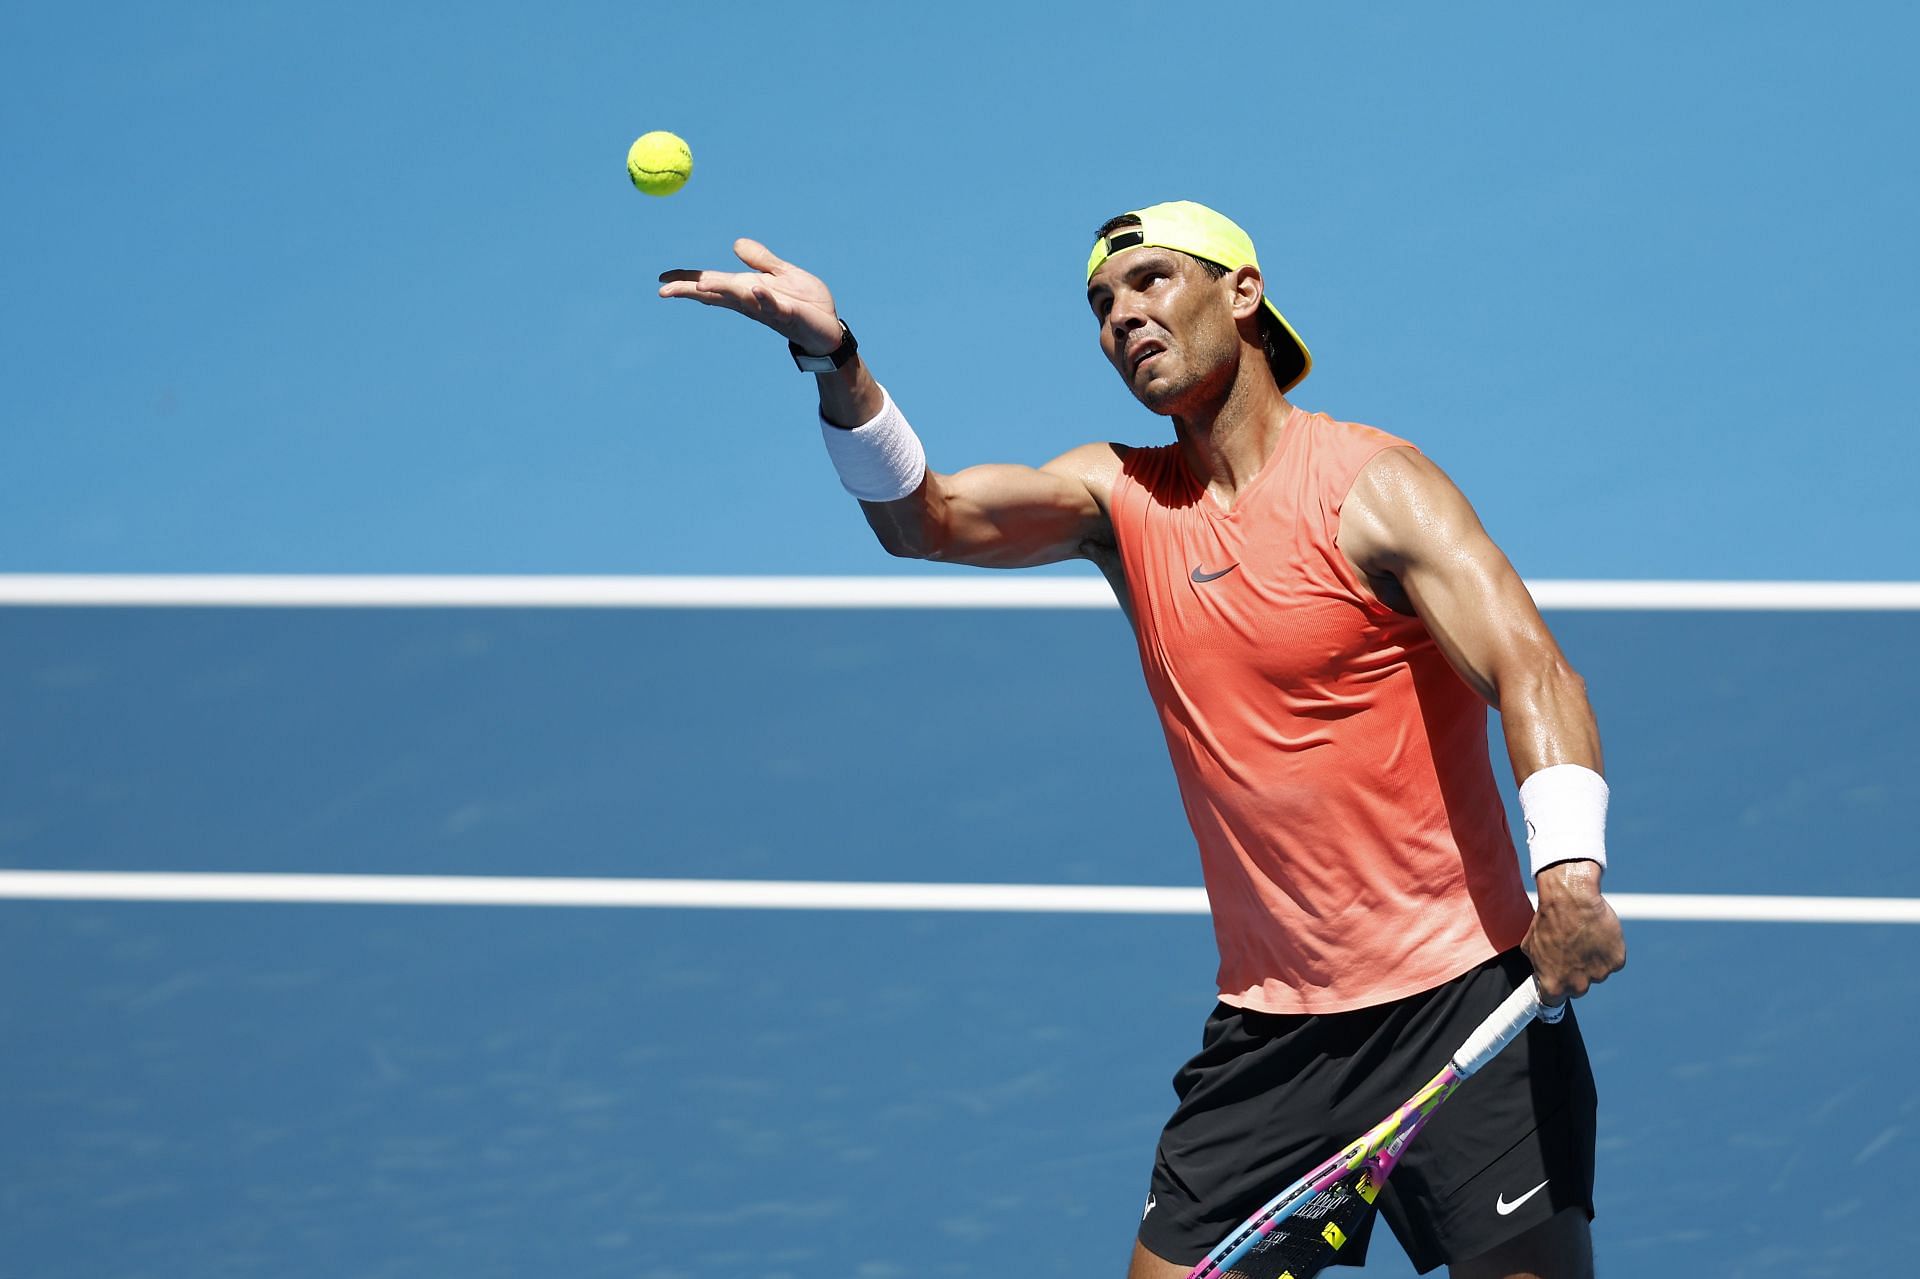 Rafael Nadal is looking to defend his Australian Open title.